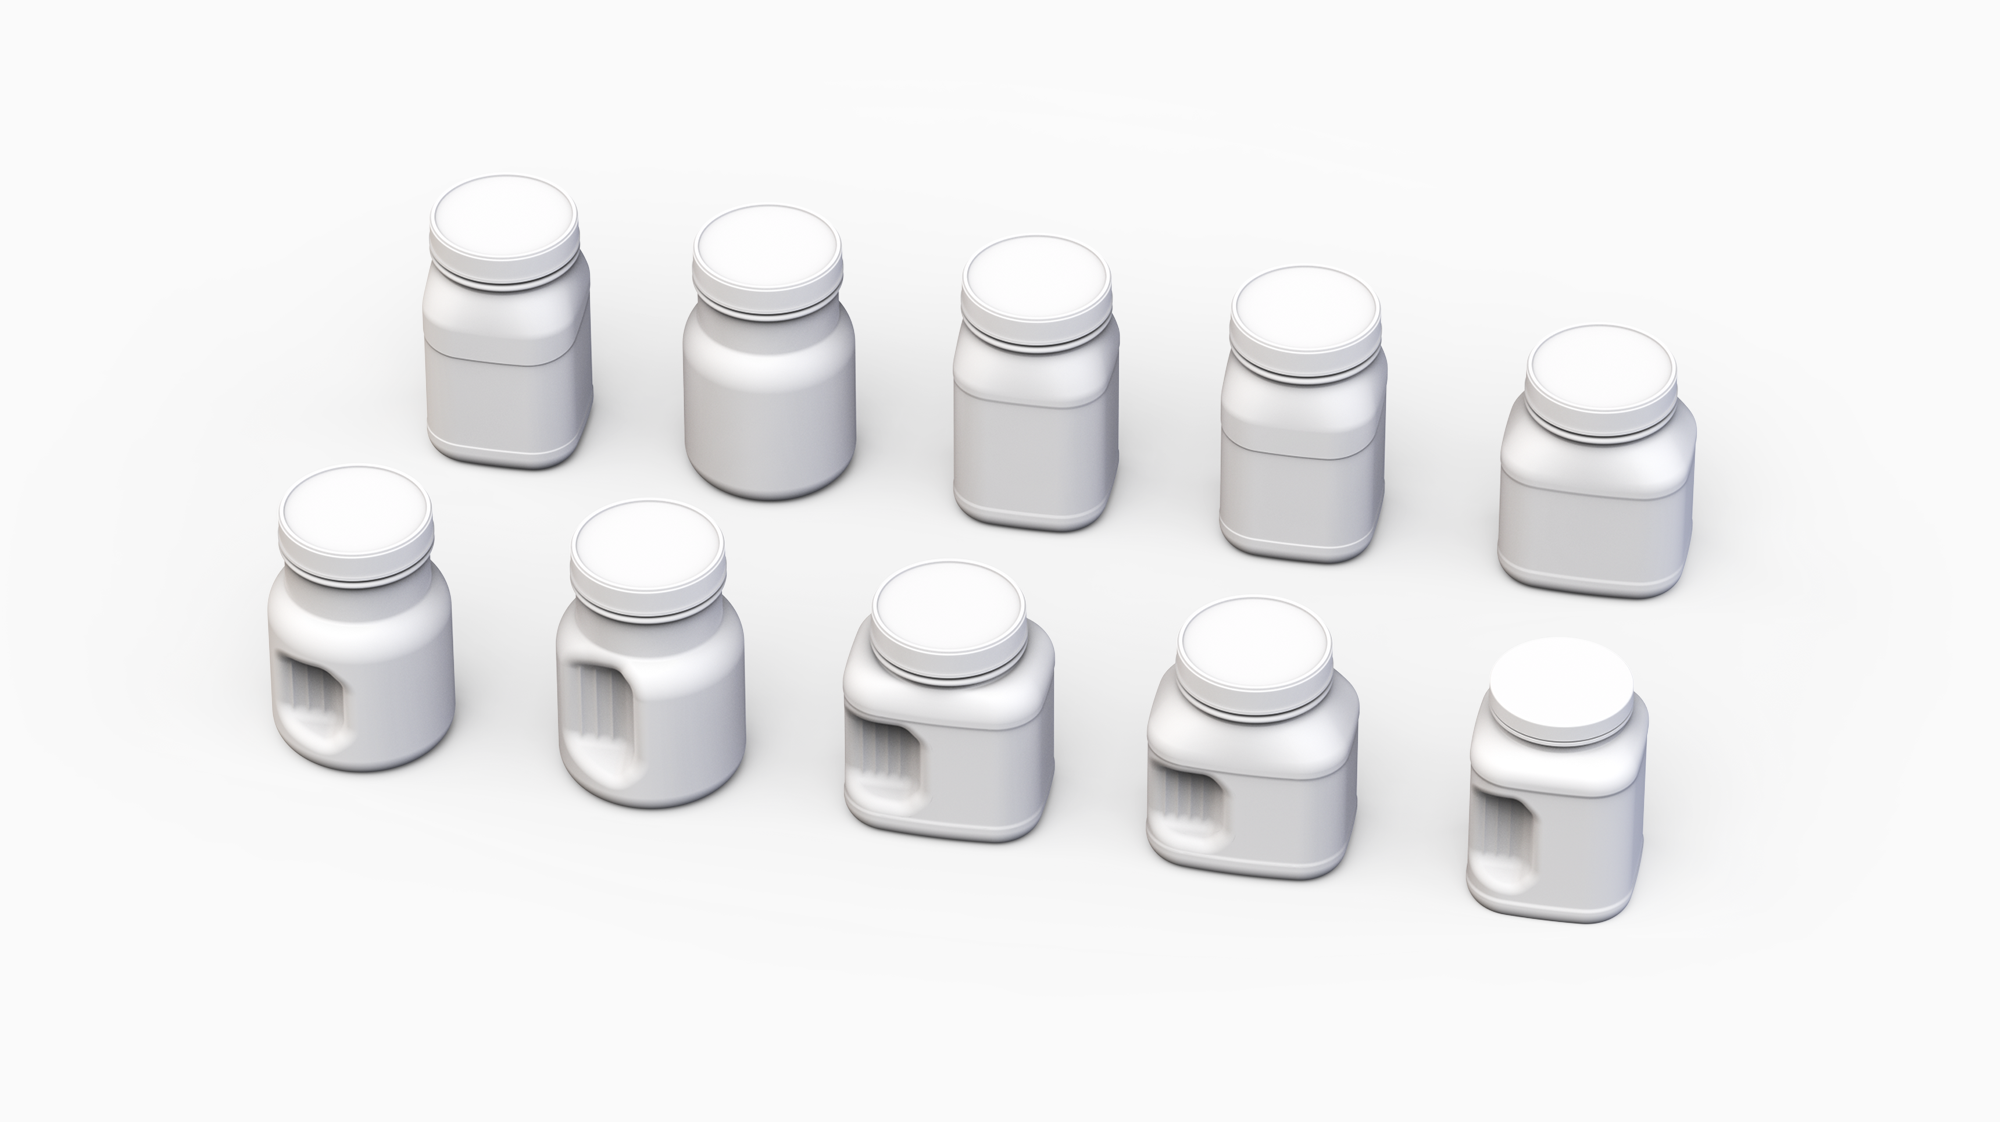 Eight 3D models of various concept designs for a nutrition container.